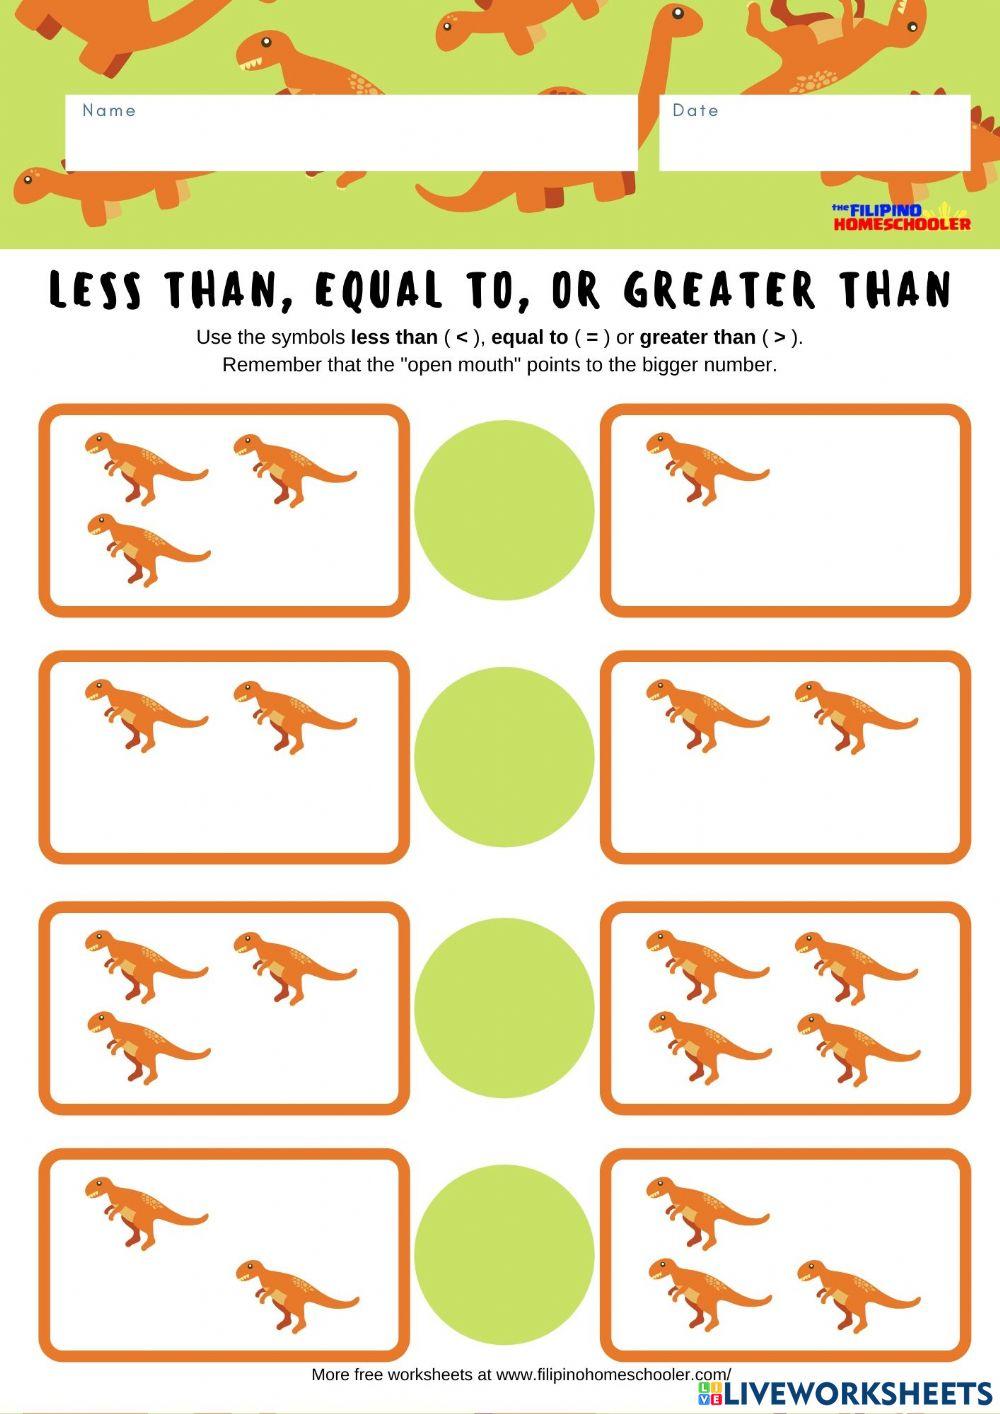 Greater than less than equal to worksheets